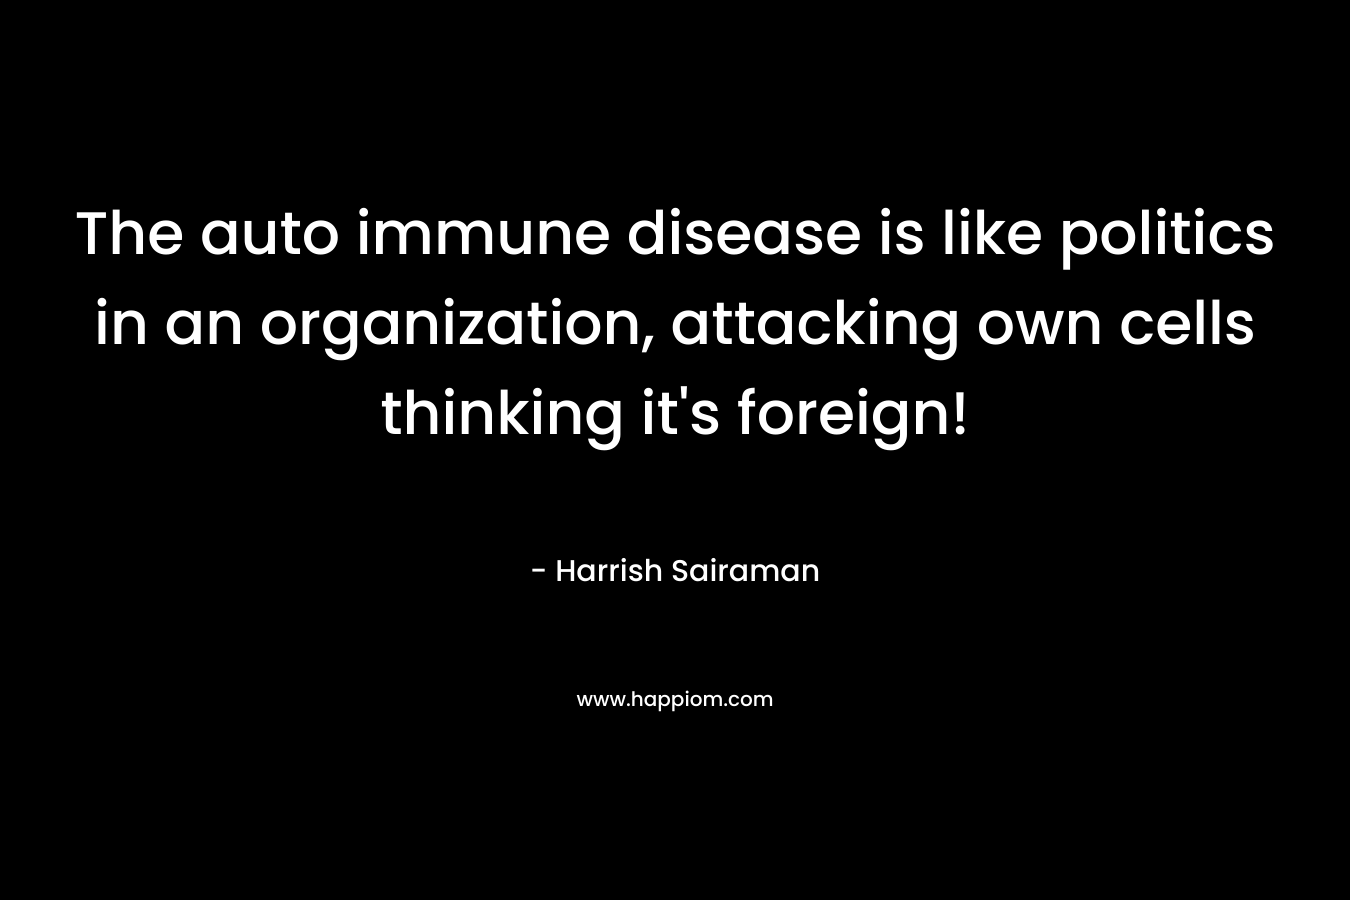 The auto immune disease is like politics in an organization, attacking own cells thinking it’s foreign! – Harrish Sairaman